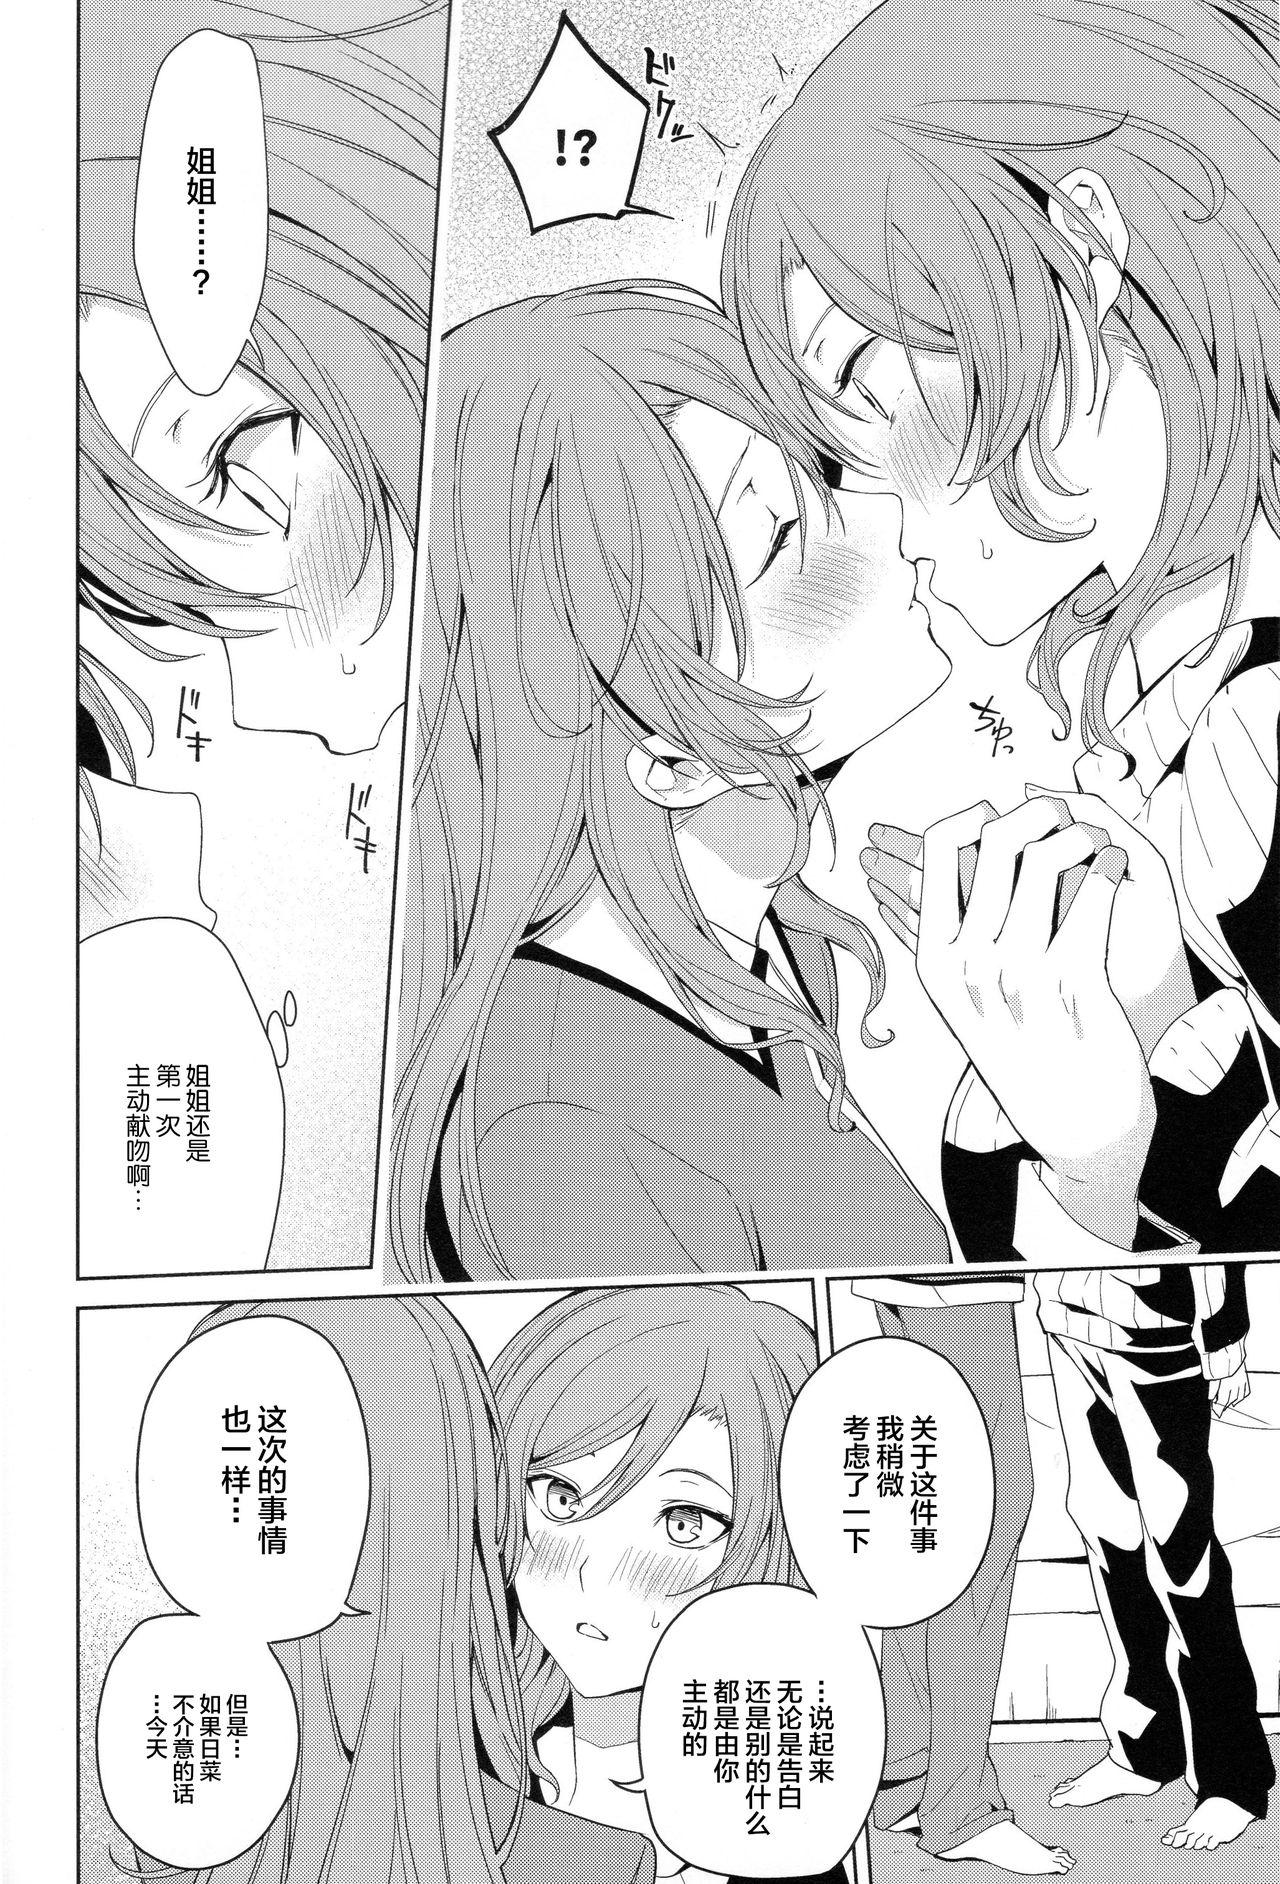 Pakistani Onee-chan to! - Bang dream Amateurs - Page 11